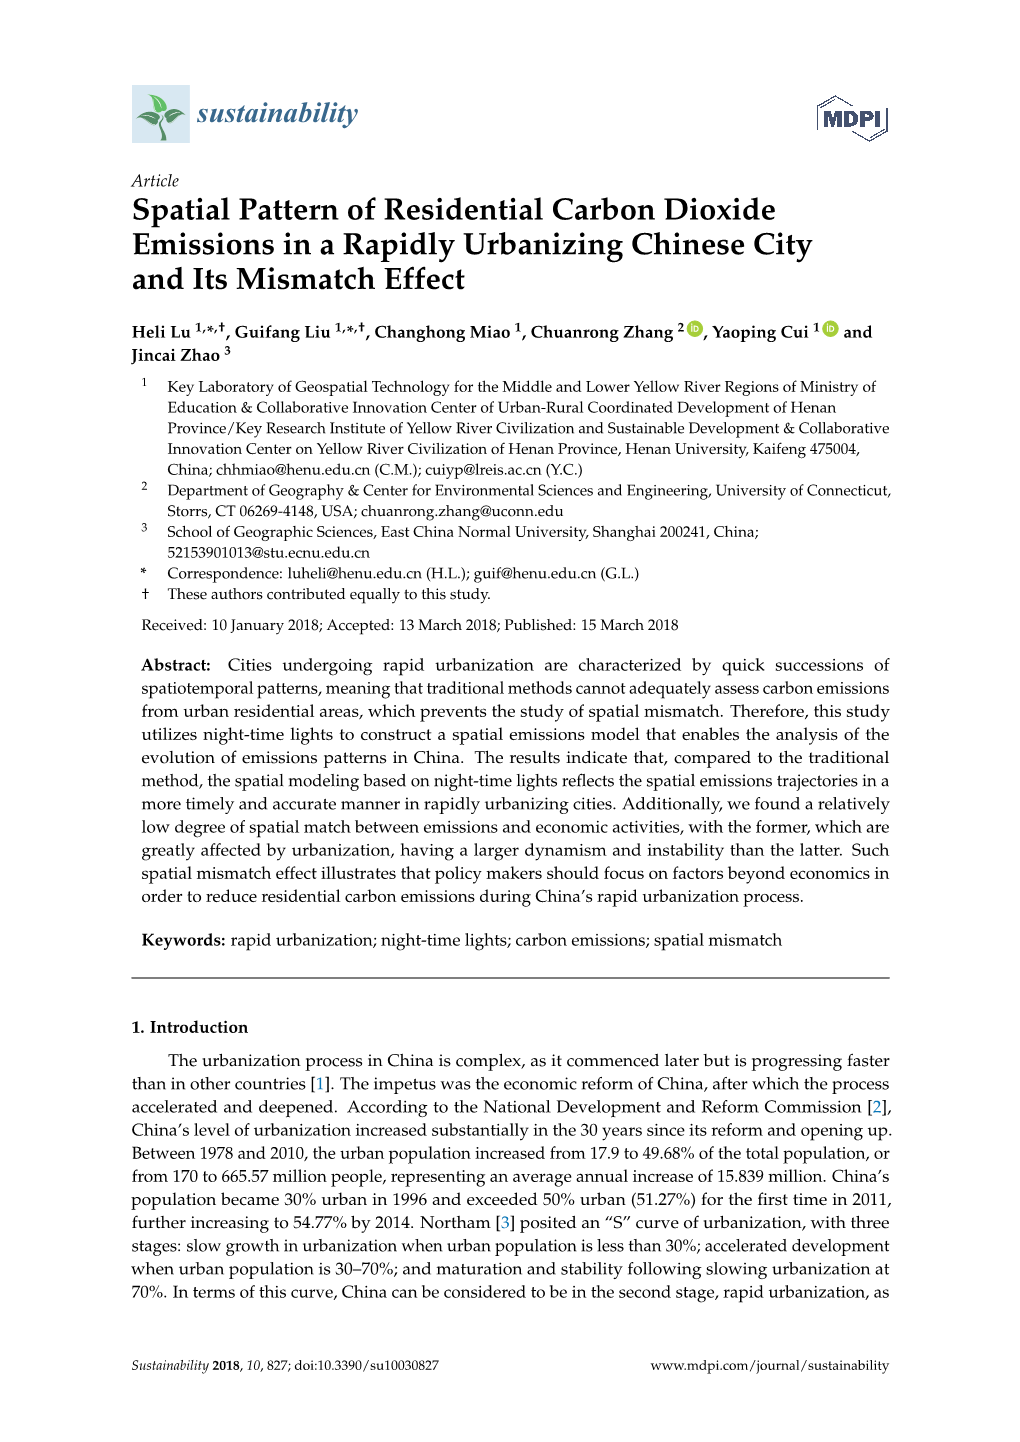 Spatial Pattern of Residential Carbon Dioxide Emissions in a Rapidly Urbanizing Chinese City and Its Mismatch Effect